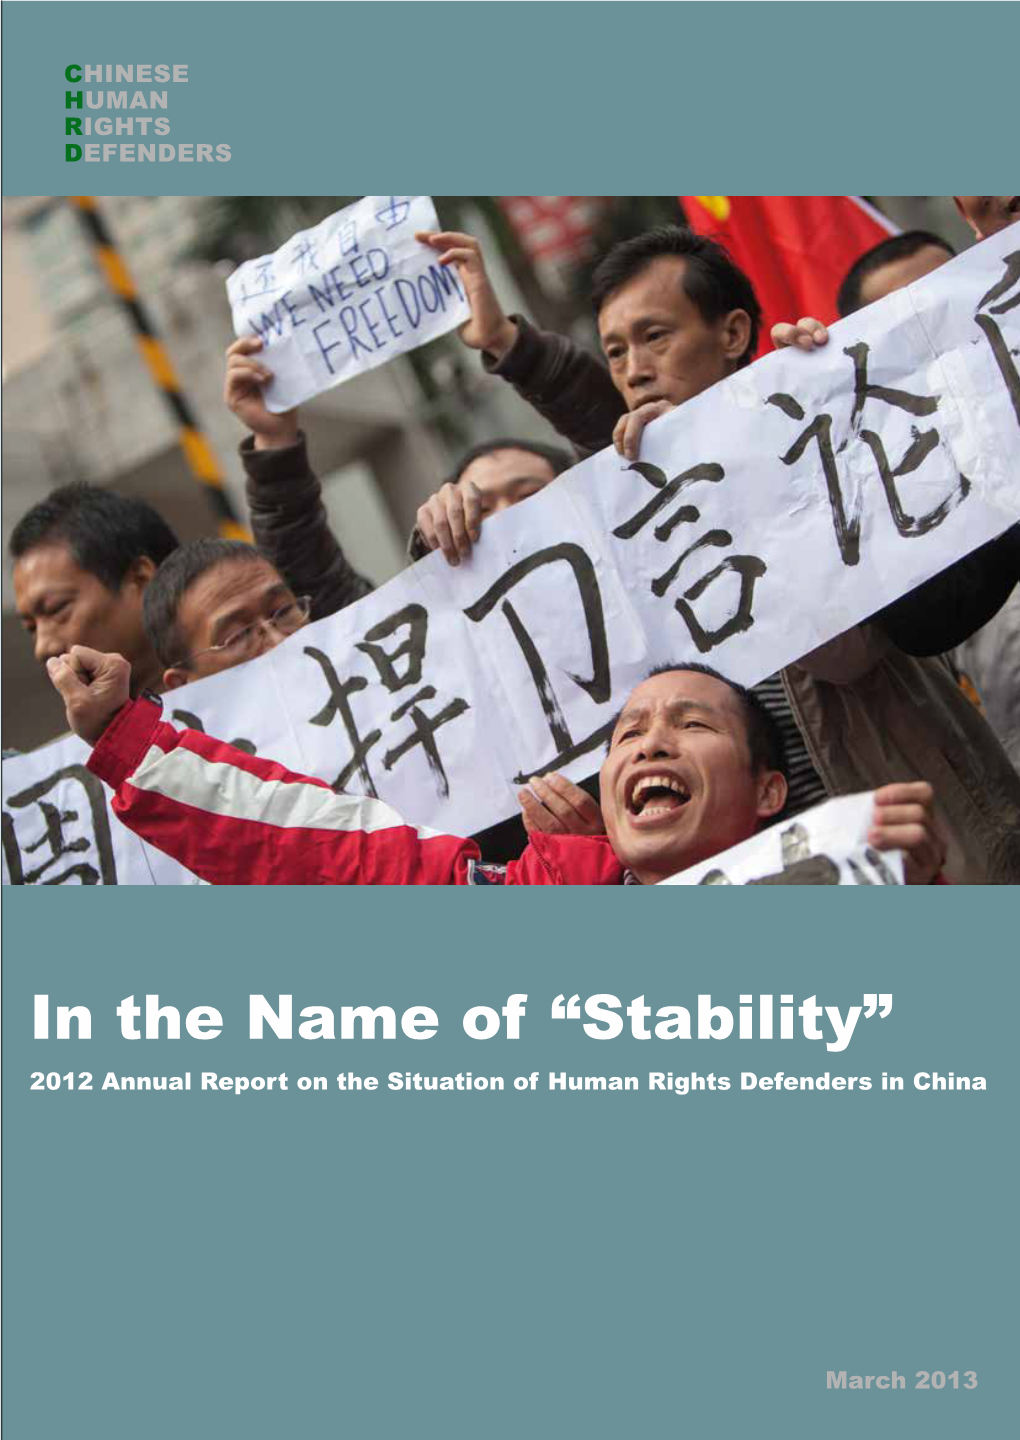 In the Name of “Stability” 2012 Annual Report on the Situation of Human Rights Defenders in China